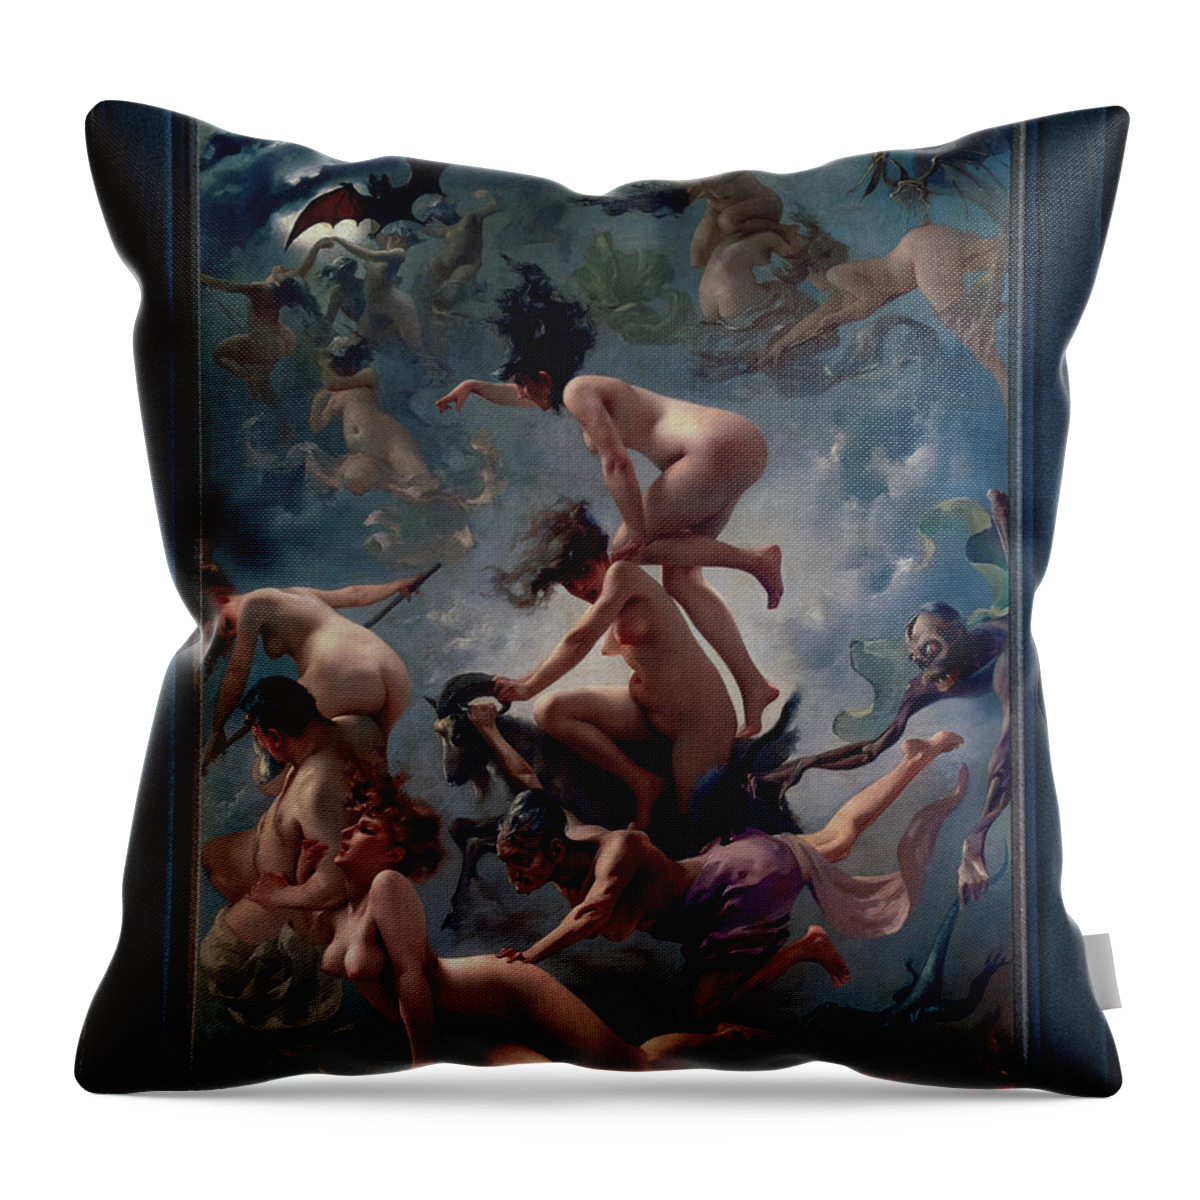 Witches Going To Their Sabbath Throw Pillow featuring the painting Witches Going To Their Sabbath by Luis Ricardo Falero Old Masters Classical Art Reproduction by Rolando Burbon